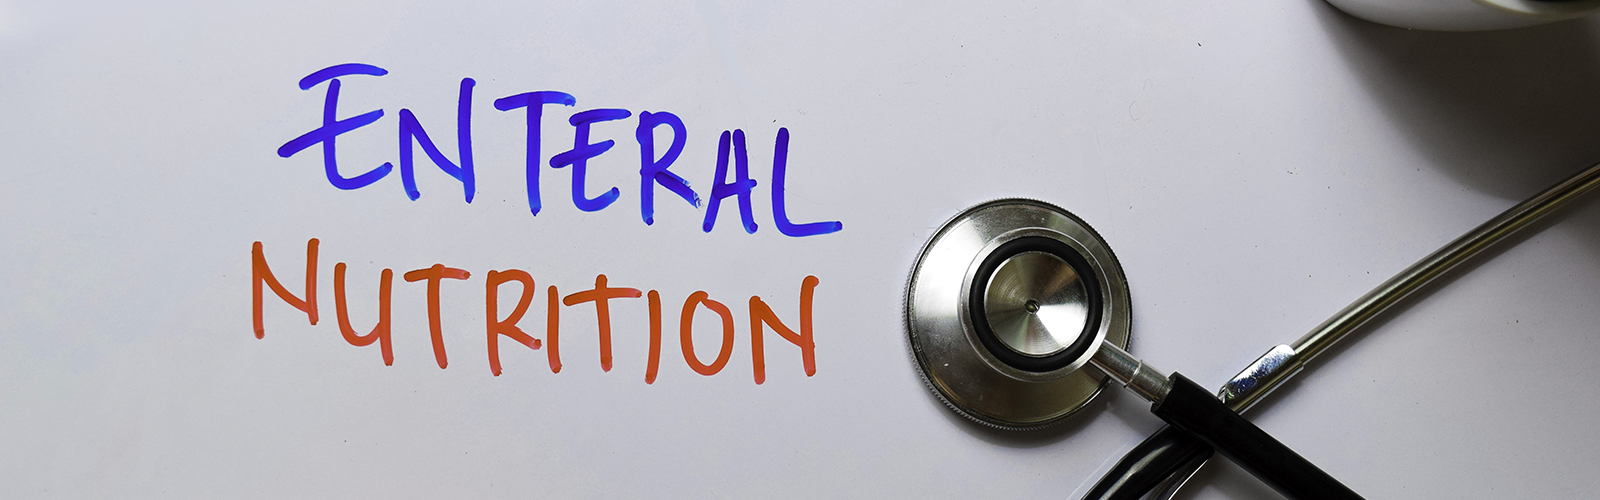 A silver stethoscope sits on top of a whiteboard with the words “Enteral Nutrition” written in blue and red marker ink. 